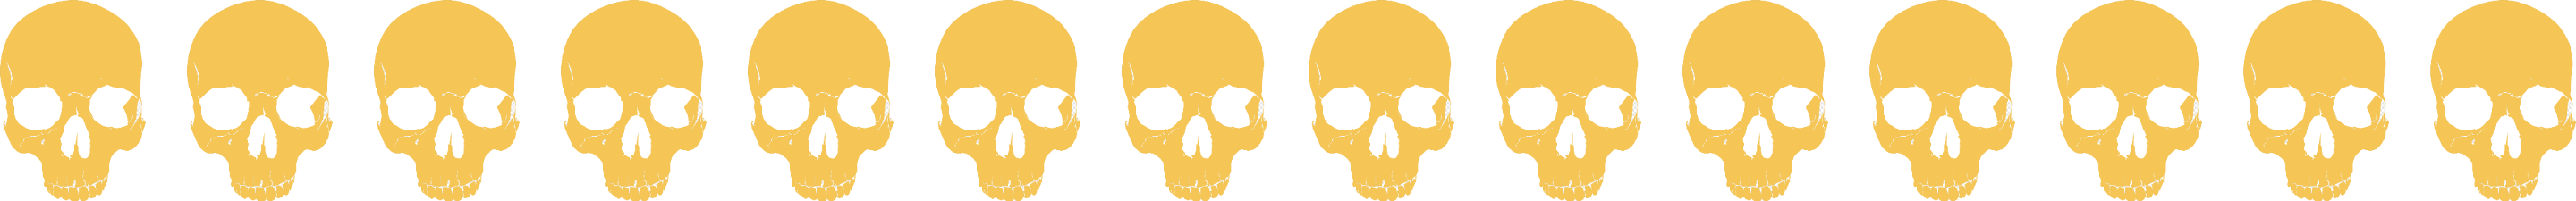 png-clipart-skull-yellow-skull-yellow-flowers-head-horz.png